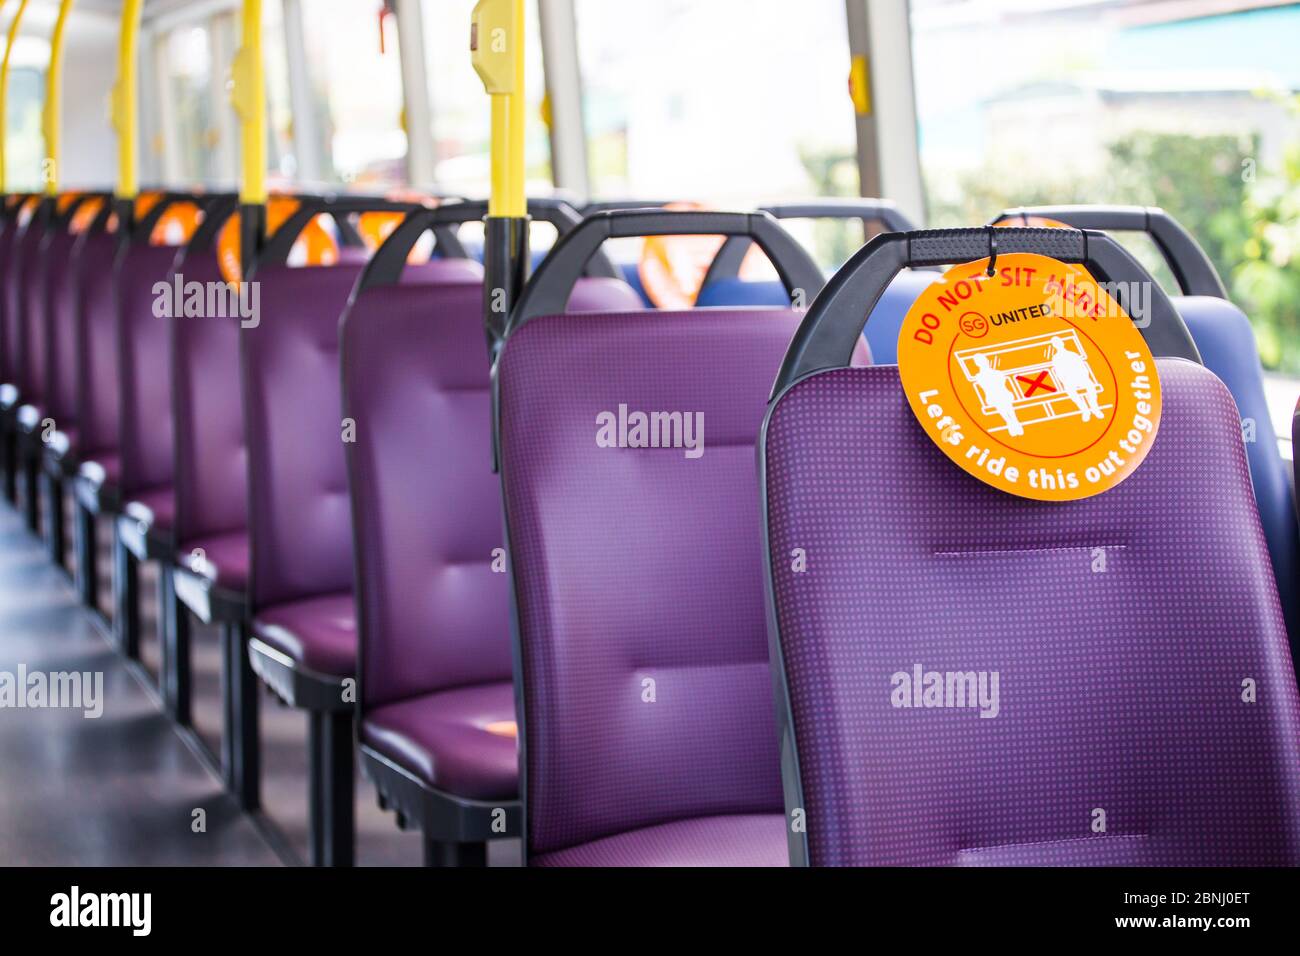 Safety distancing in place on a bus during this coronavirus pandemic, singapore Stock Photo